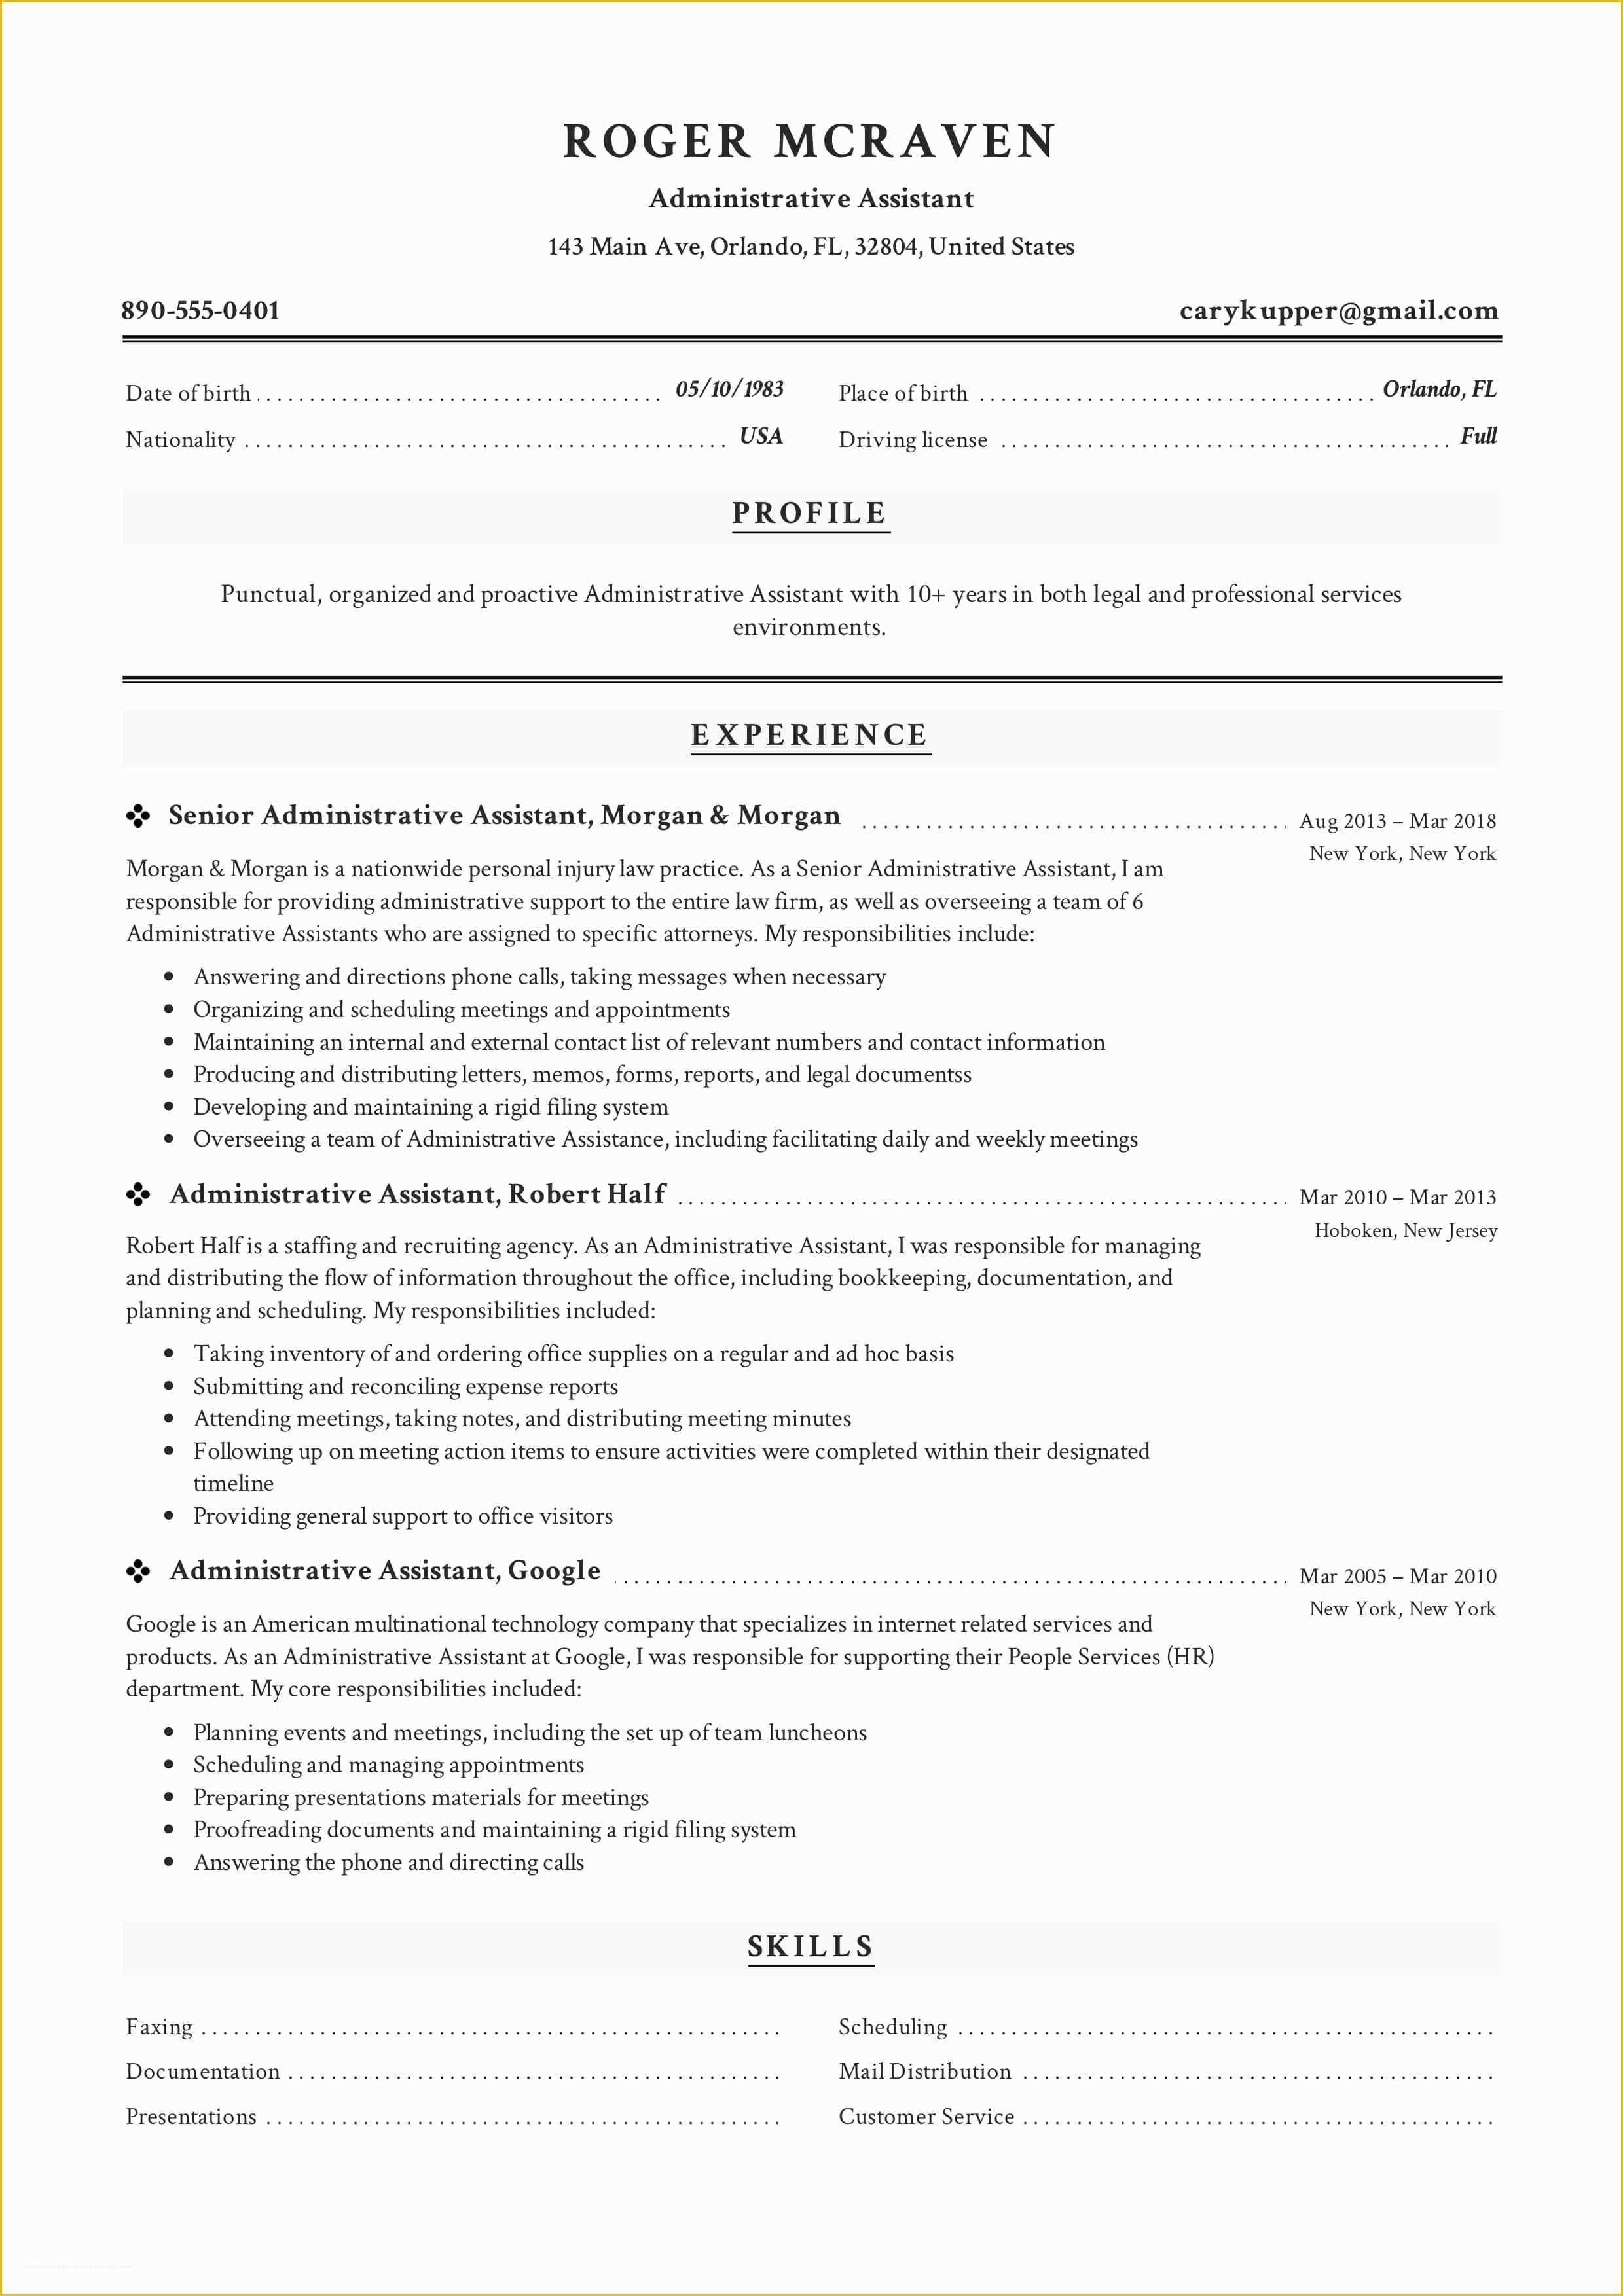 Administrative Resume Templates Free Of Full Guide Administrative assistant Resume [ 12 Samples